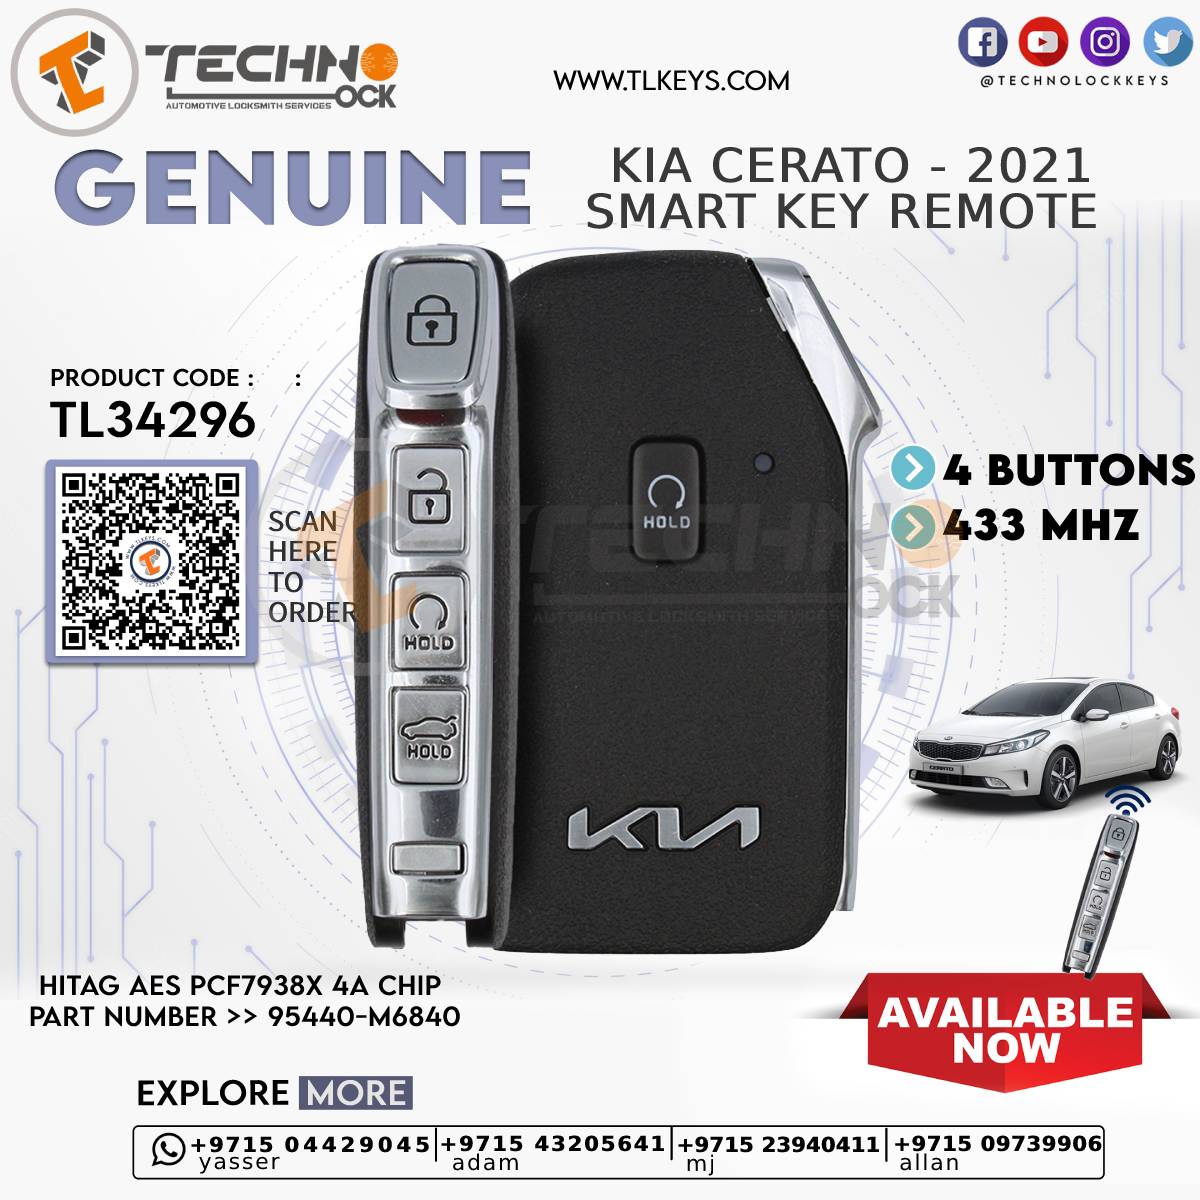 Smart-Key-Remote-4-Buttons-433-MHz